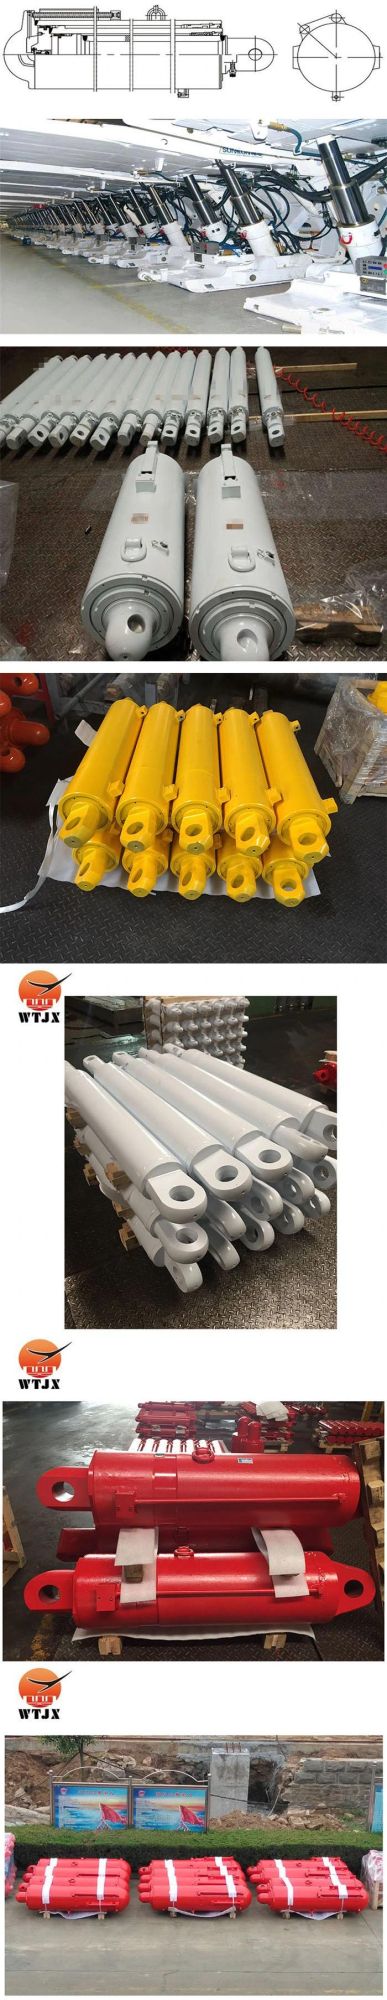 Single Acting Coal Mining Hydraulic Cylinder Supplier